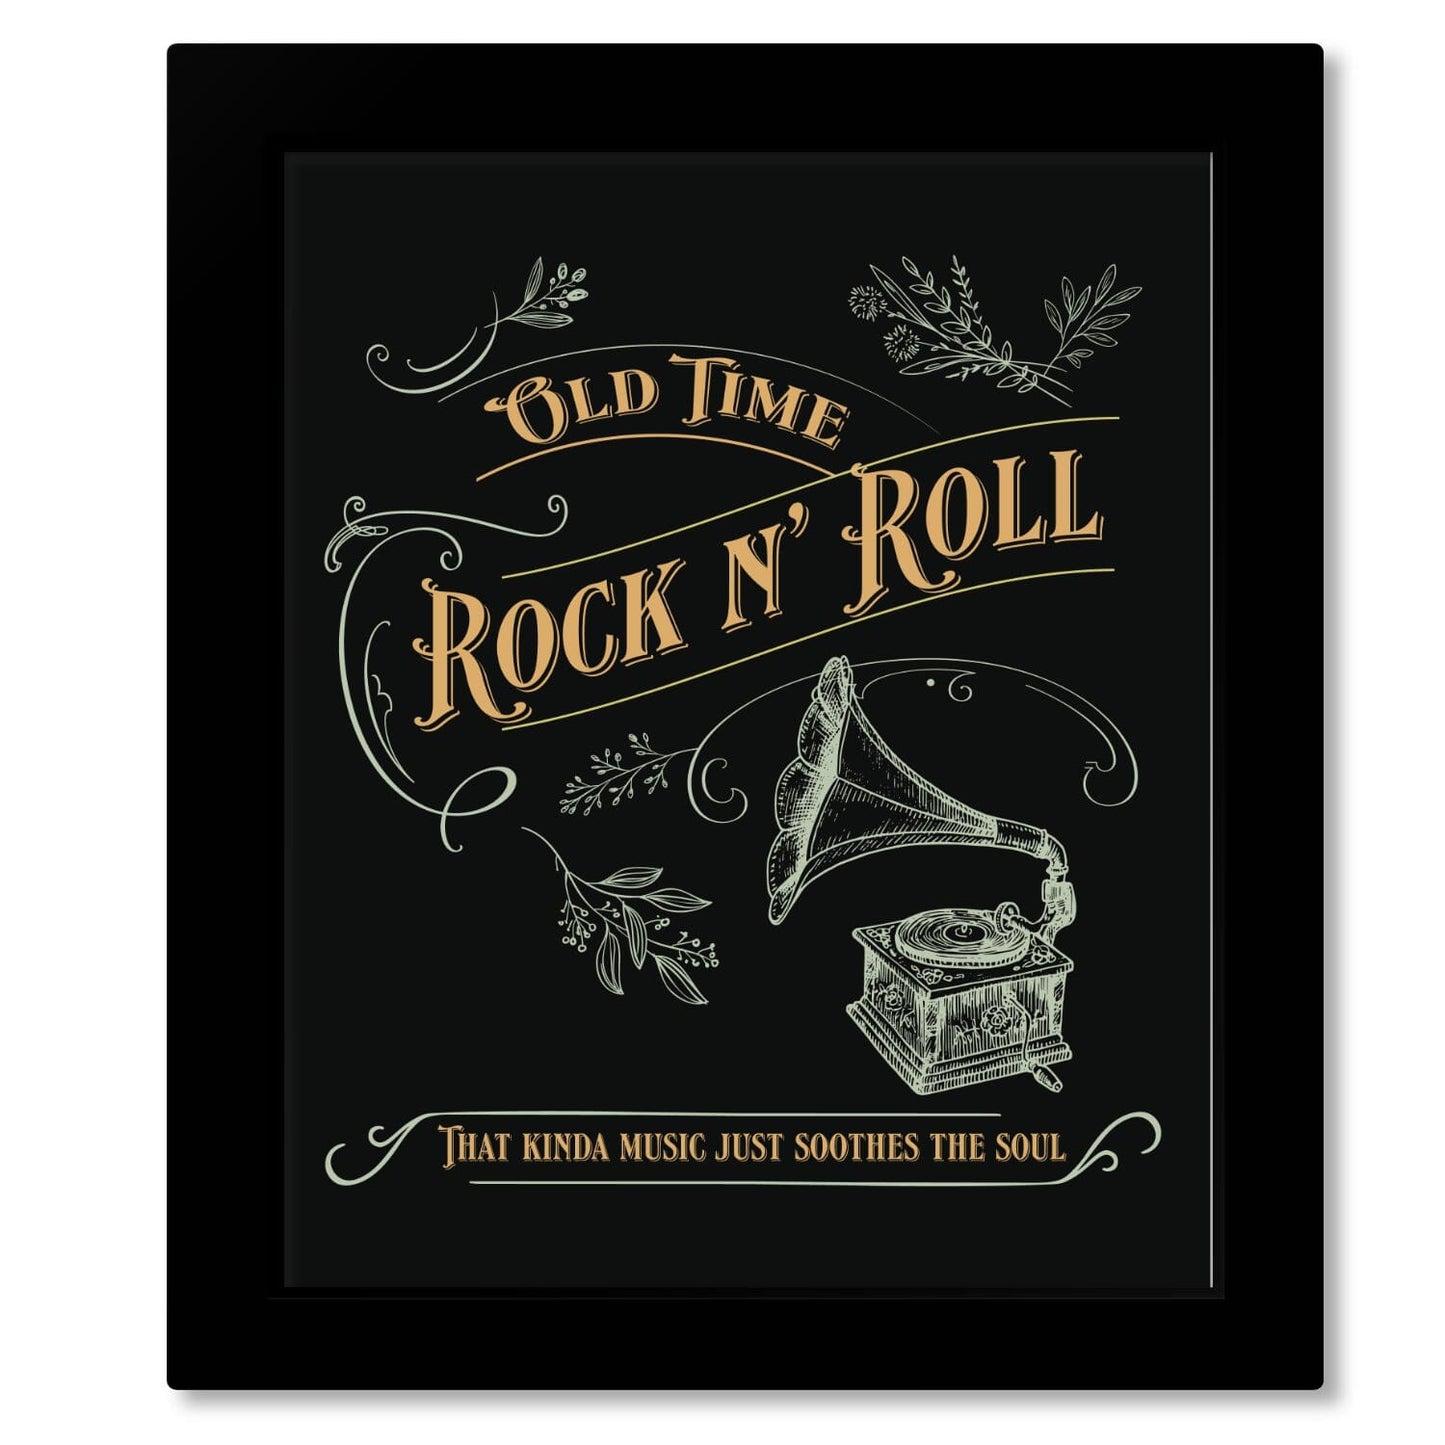 Old Time Rock N' Roll by Bob Seger - Song Lyrics Art Print Song Lyrics Art Song Lyrics Art 8x10 Framed Print (without Mat) 